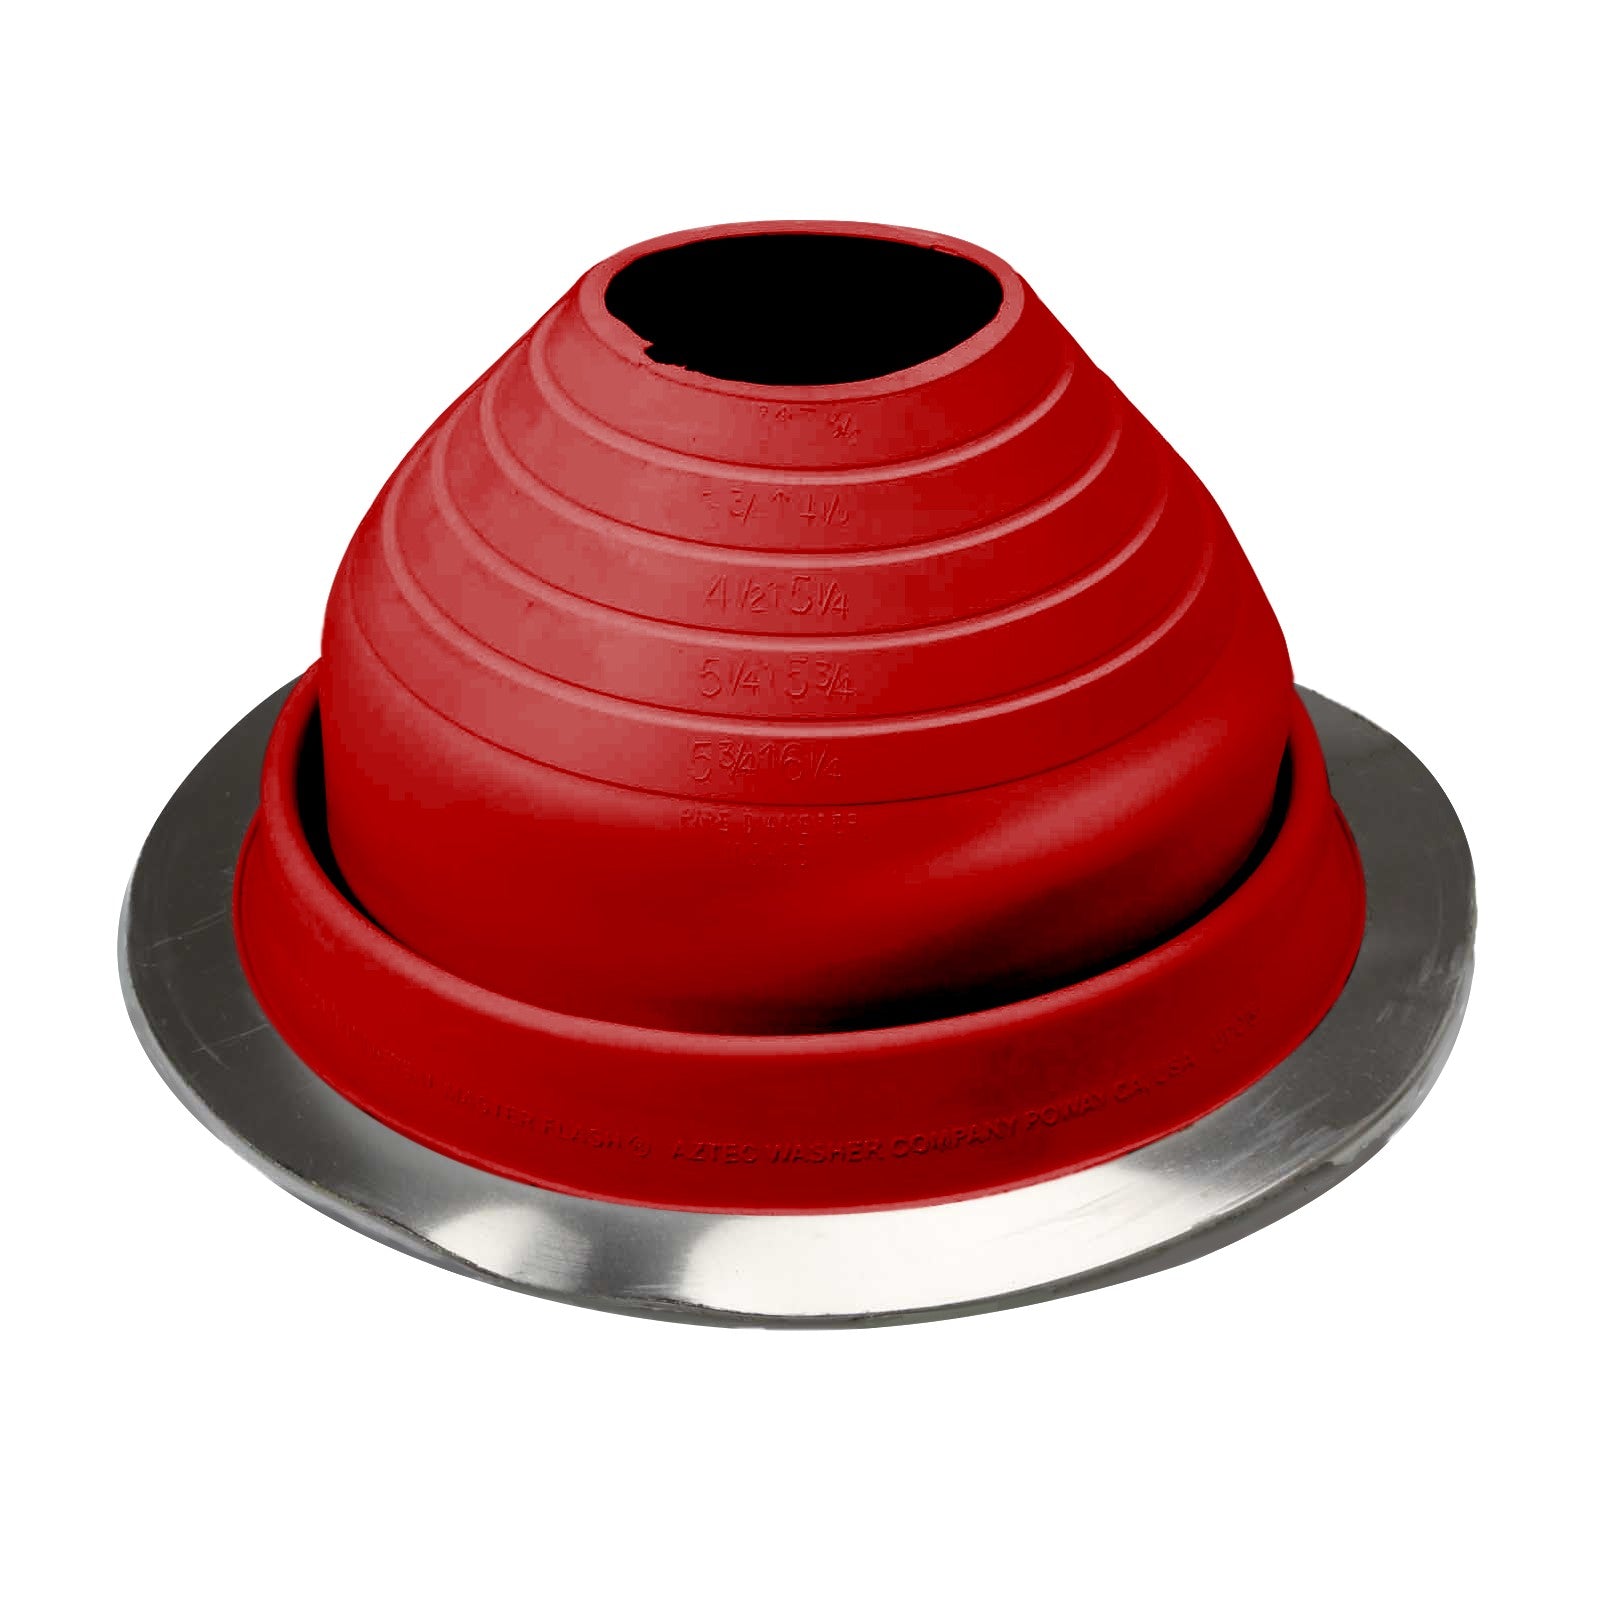 #4 Roofjack Round EPDM Pipe Flashing Boot Bright Red